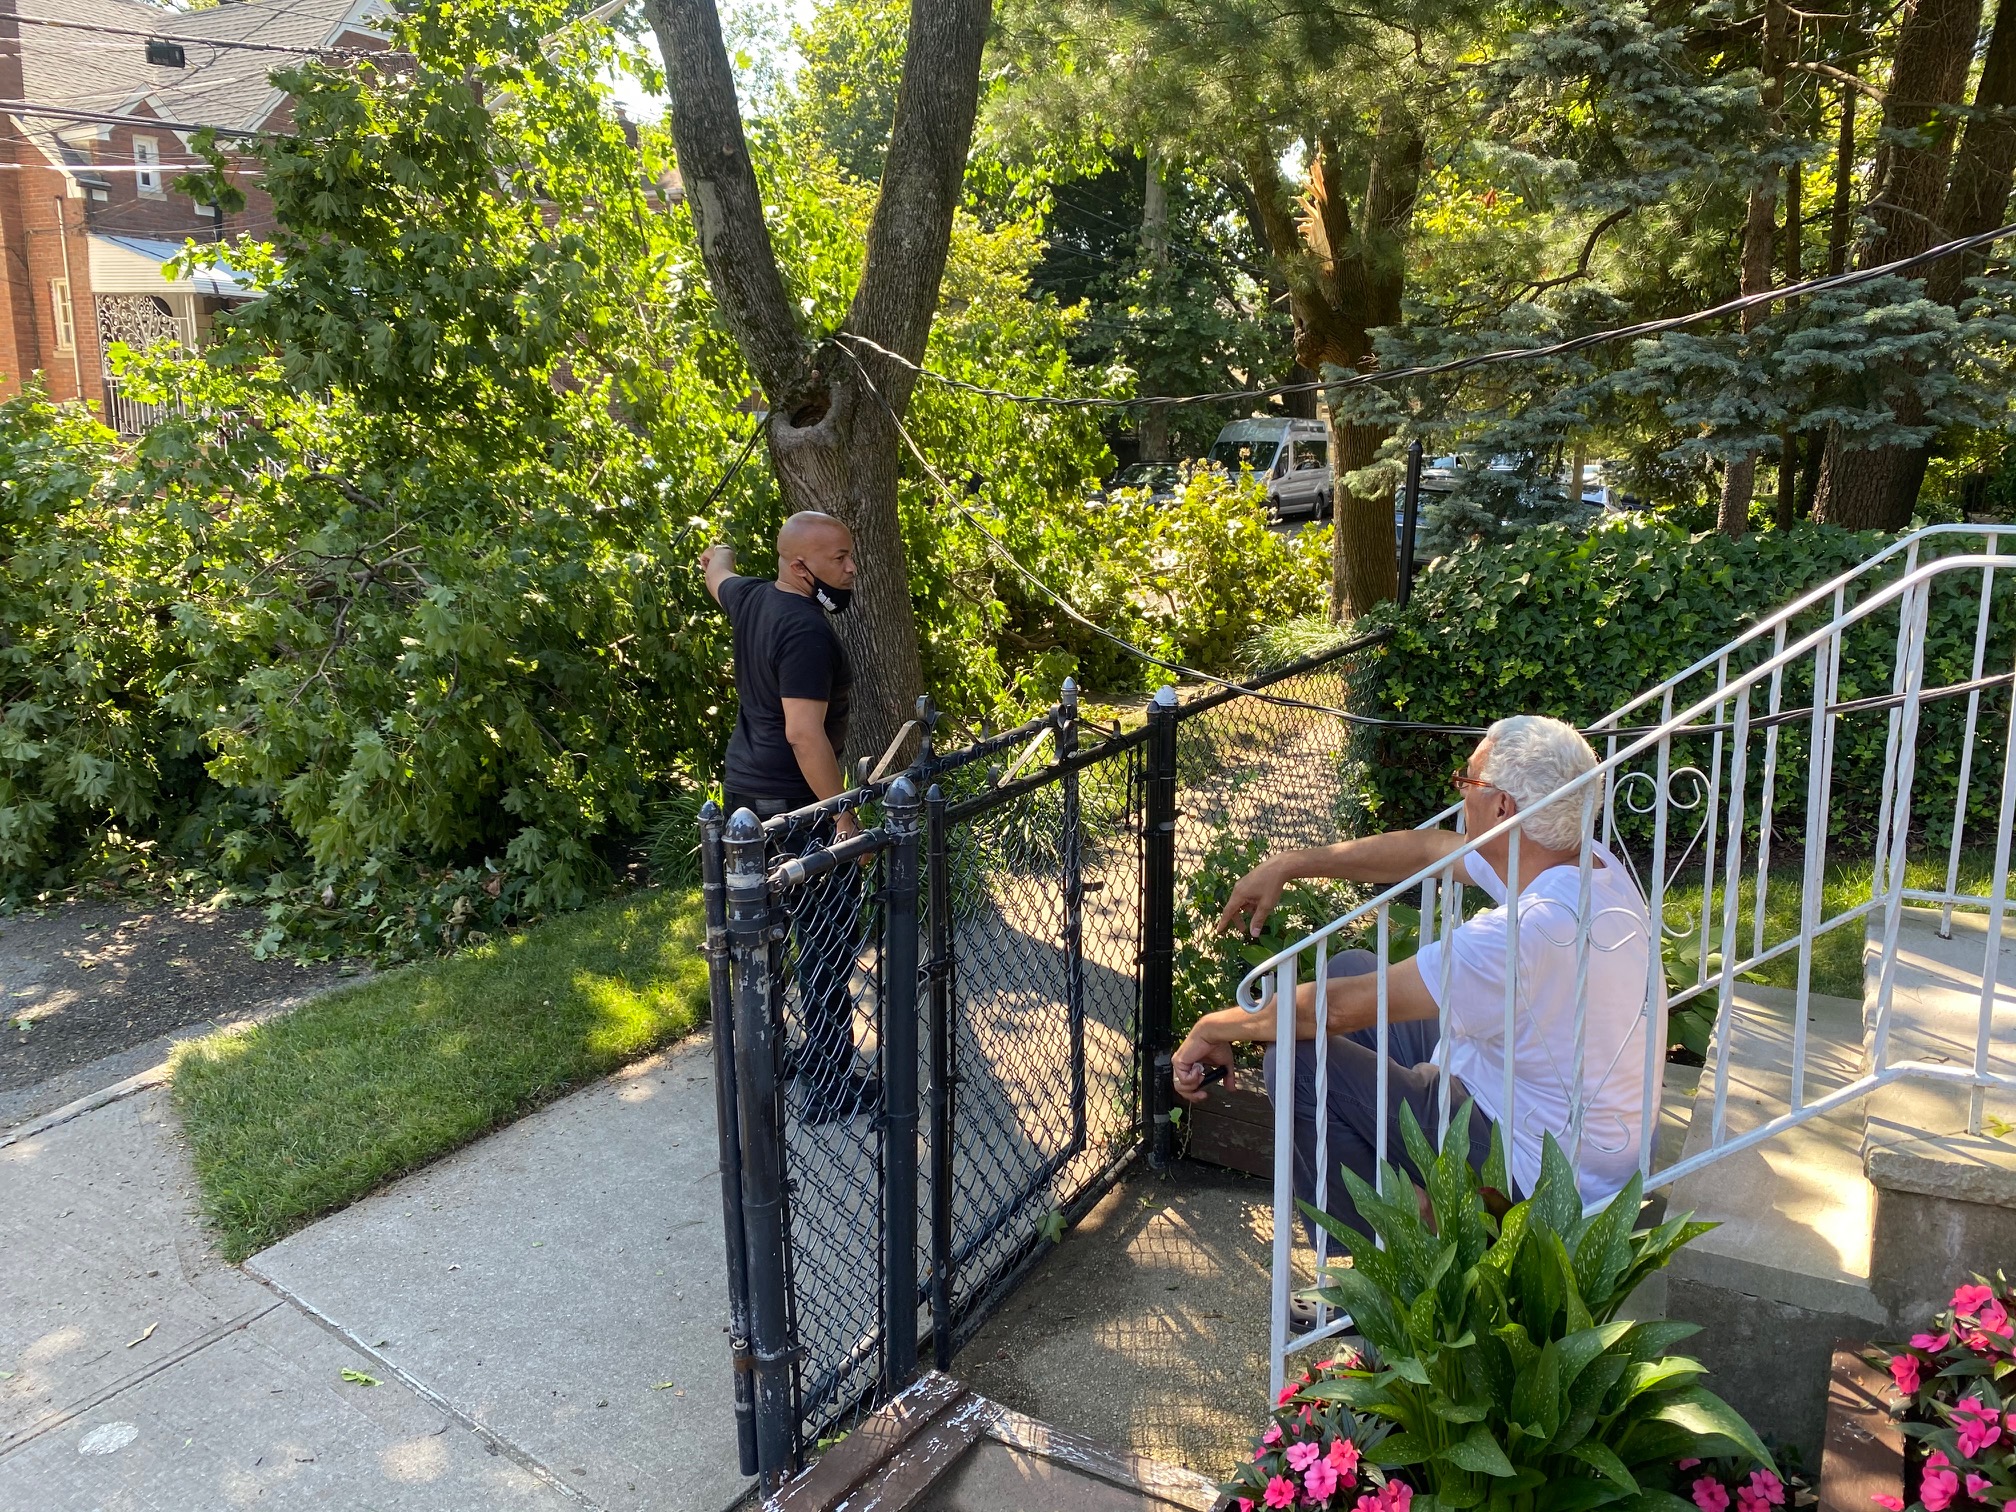 After Tropical storm Isias touched down in NYC, Speaker Heastie along with staff went out to assess damages, speak with concerned constituents, and liaised with Con Edison leadership to remove downed